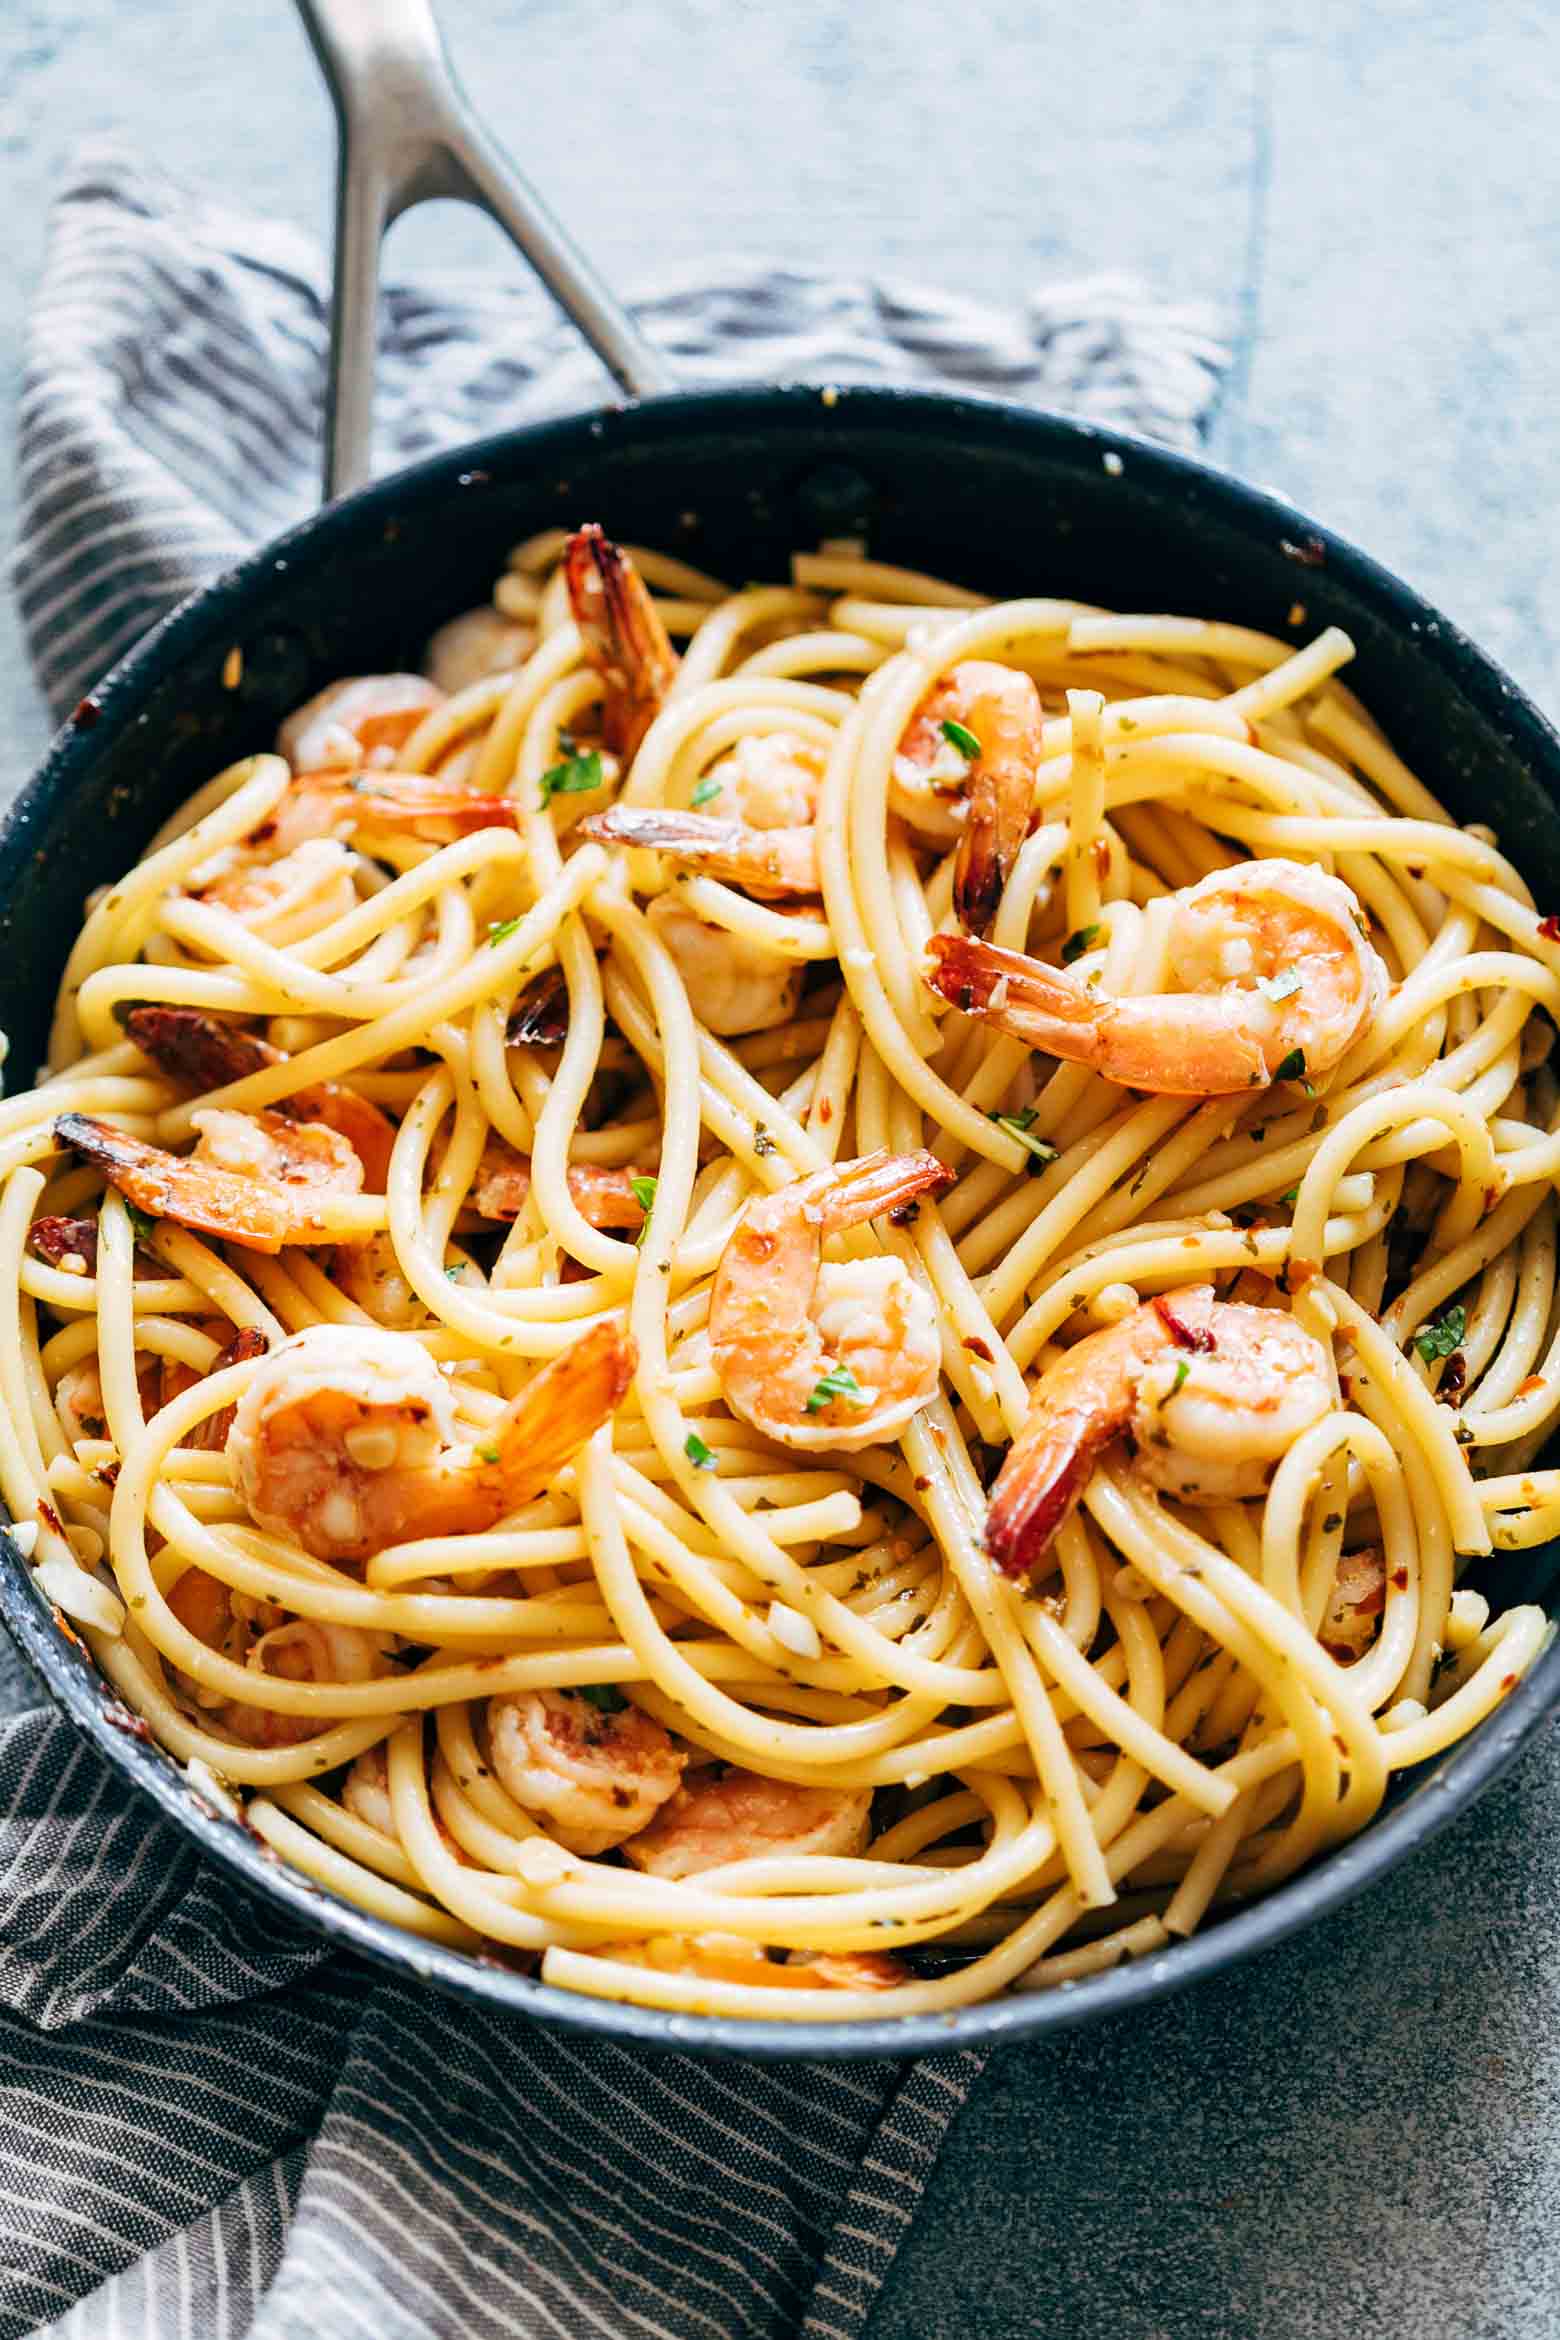 Shrimp Spaghetti Aglio Olio is a 5 ingredient pasta recipe (shrimp, olive oil, garlic, peperoncino or chilli flakes and parsley) thats ready in 20 minutes and has the easiest, most delicious pasta sauce you'll ever make!